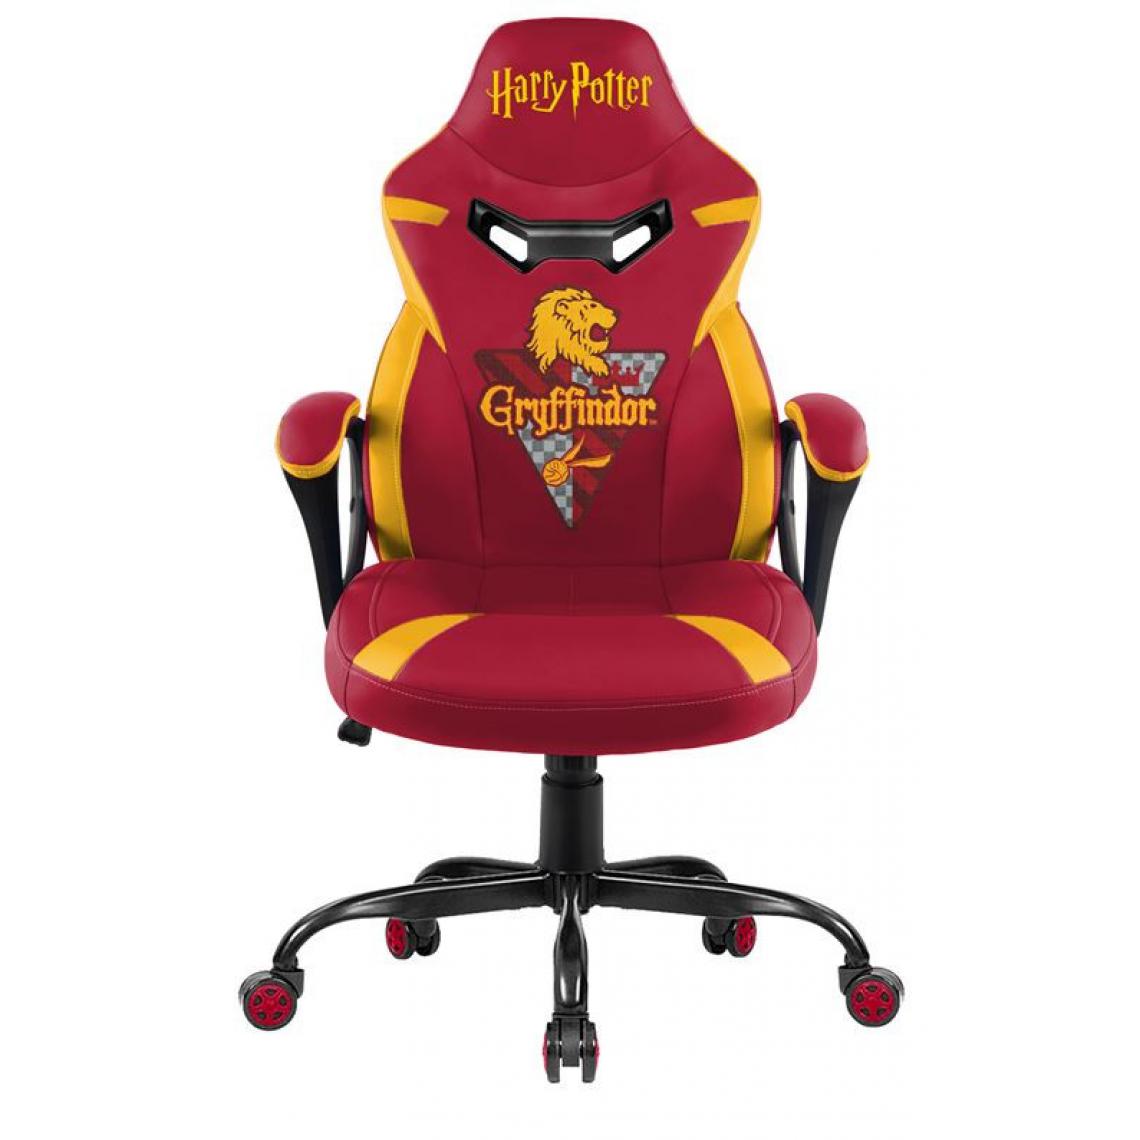 Subsonic - SUBSONIC - Harry Potter - Siège Gaming - Modèle Junior - Sous Licence Officielle - Chaise gamer